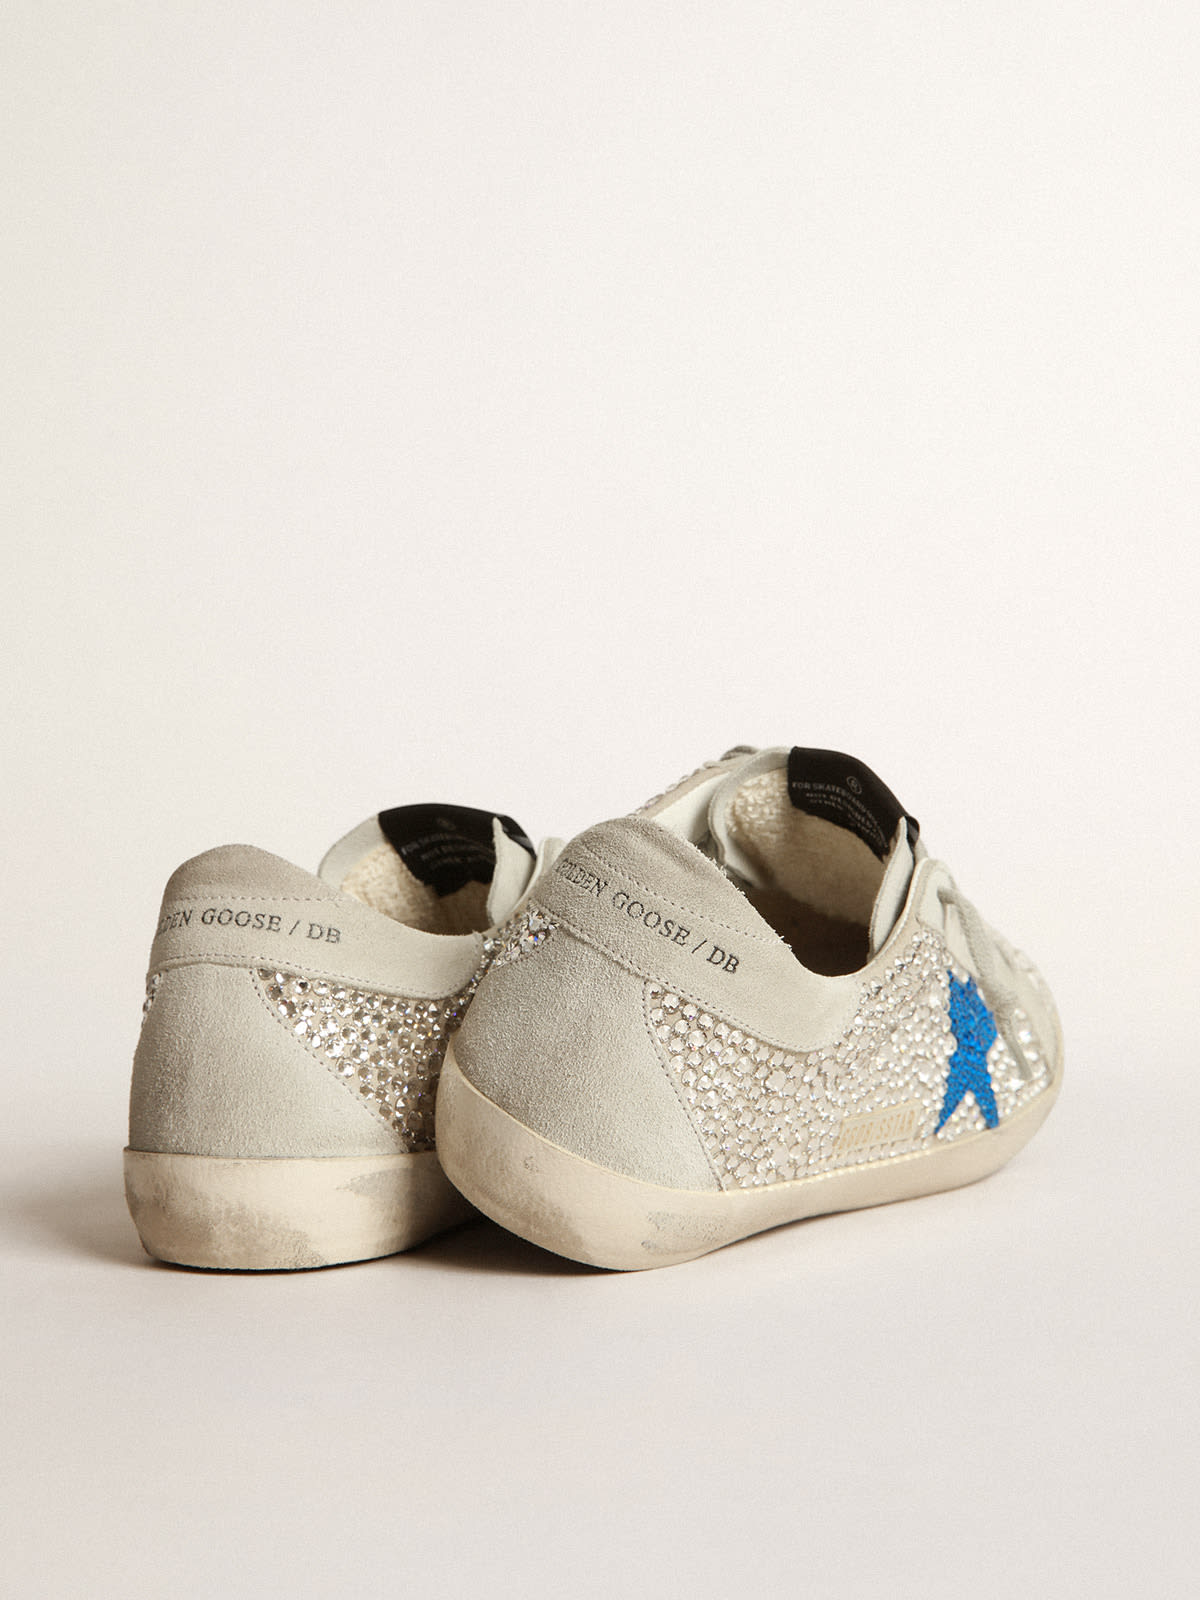 Golden Goose - Super-Star sneakers in gray suede and silver Swarovski crystals with blue suede and blue Swarovski crystal star in 